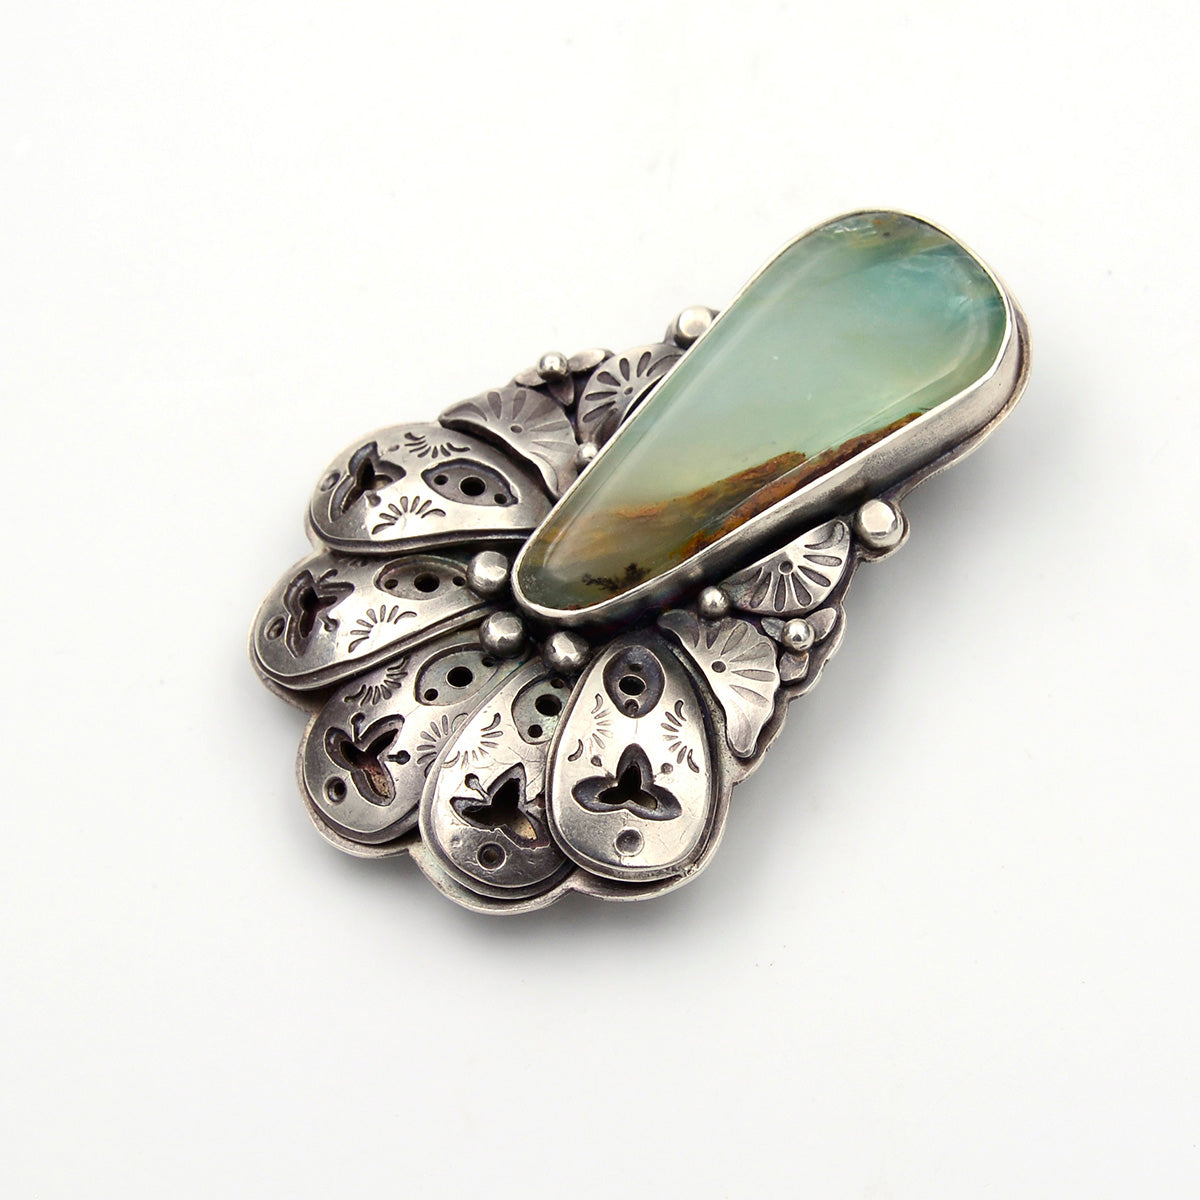 Together - Peruvian Opals & Sterling Silver Pendant Brooch - Faith Collection